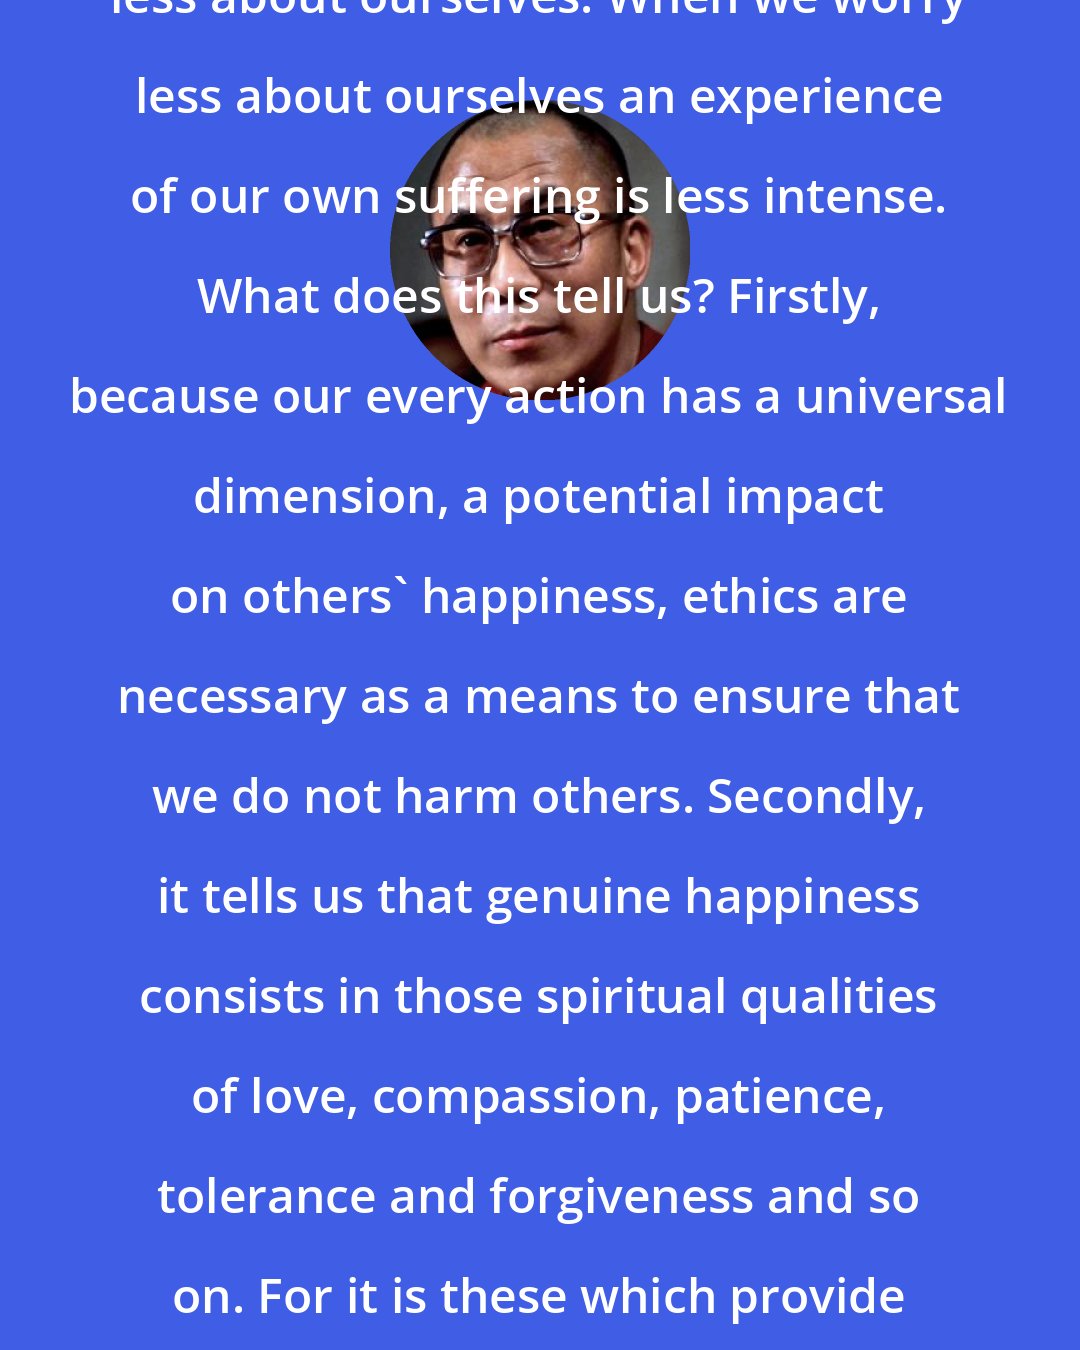 Dalai Lama: In our concern for others, we worry less about ourselves. When we worry less about ourselves an experience of our own suffering is less intense. What does this tell us? Firstly, because our every action has a universal dimension, a potential impact on others' happiness, ethics are necessary as a means to ensure that we do not harm others. Secondly, it tells us that genuine happiness consists in those spiritual qualities of love, compassion, patience, tolerance and forgiveness and so on. For it is these which provide both for our happiness and others' happiness.